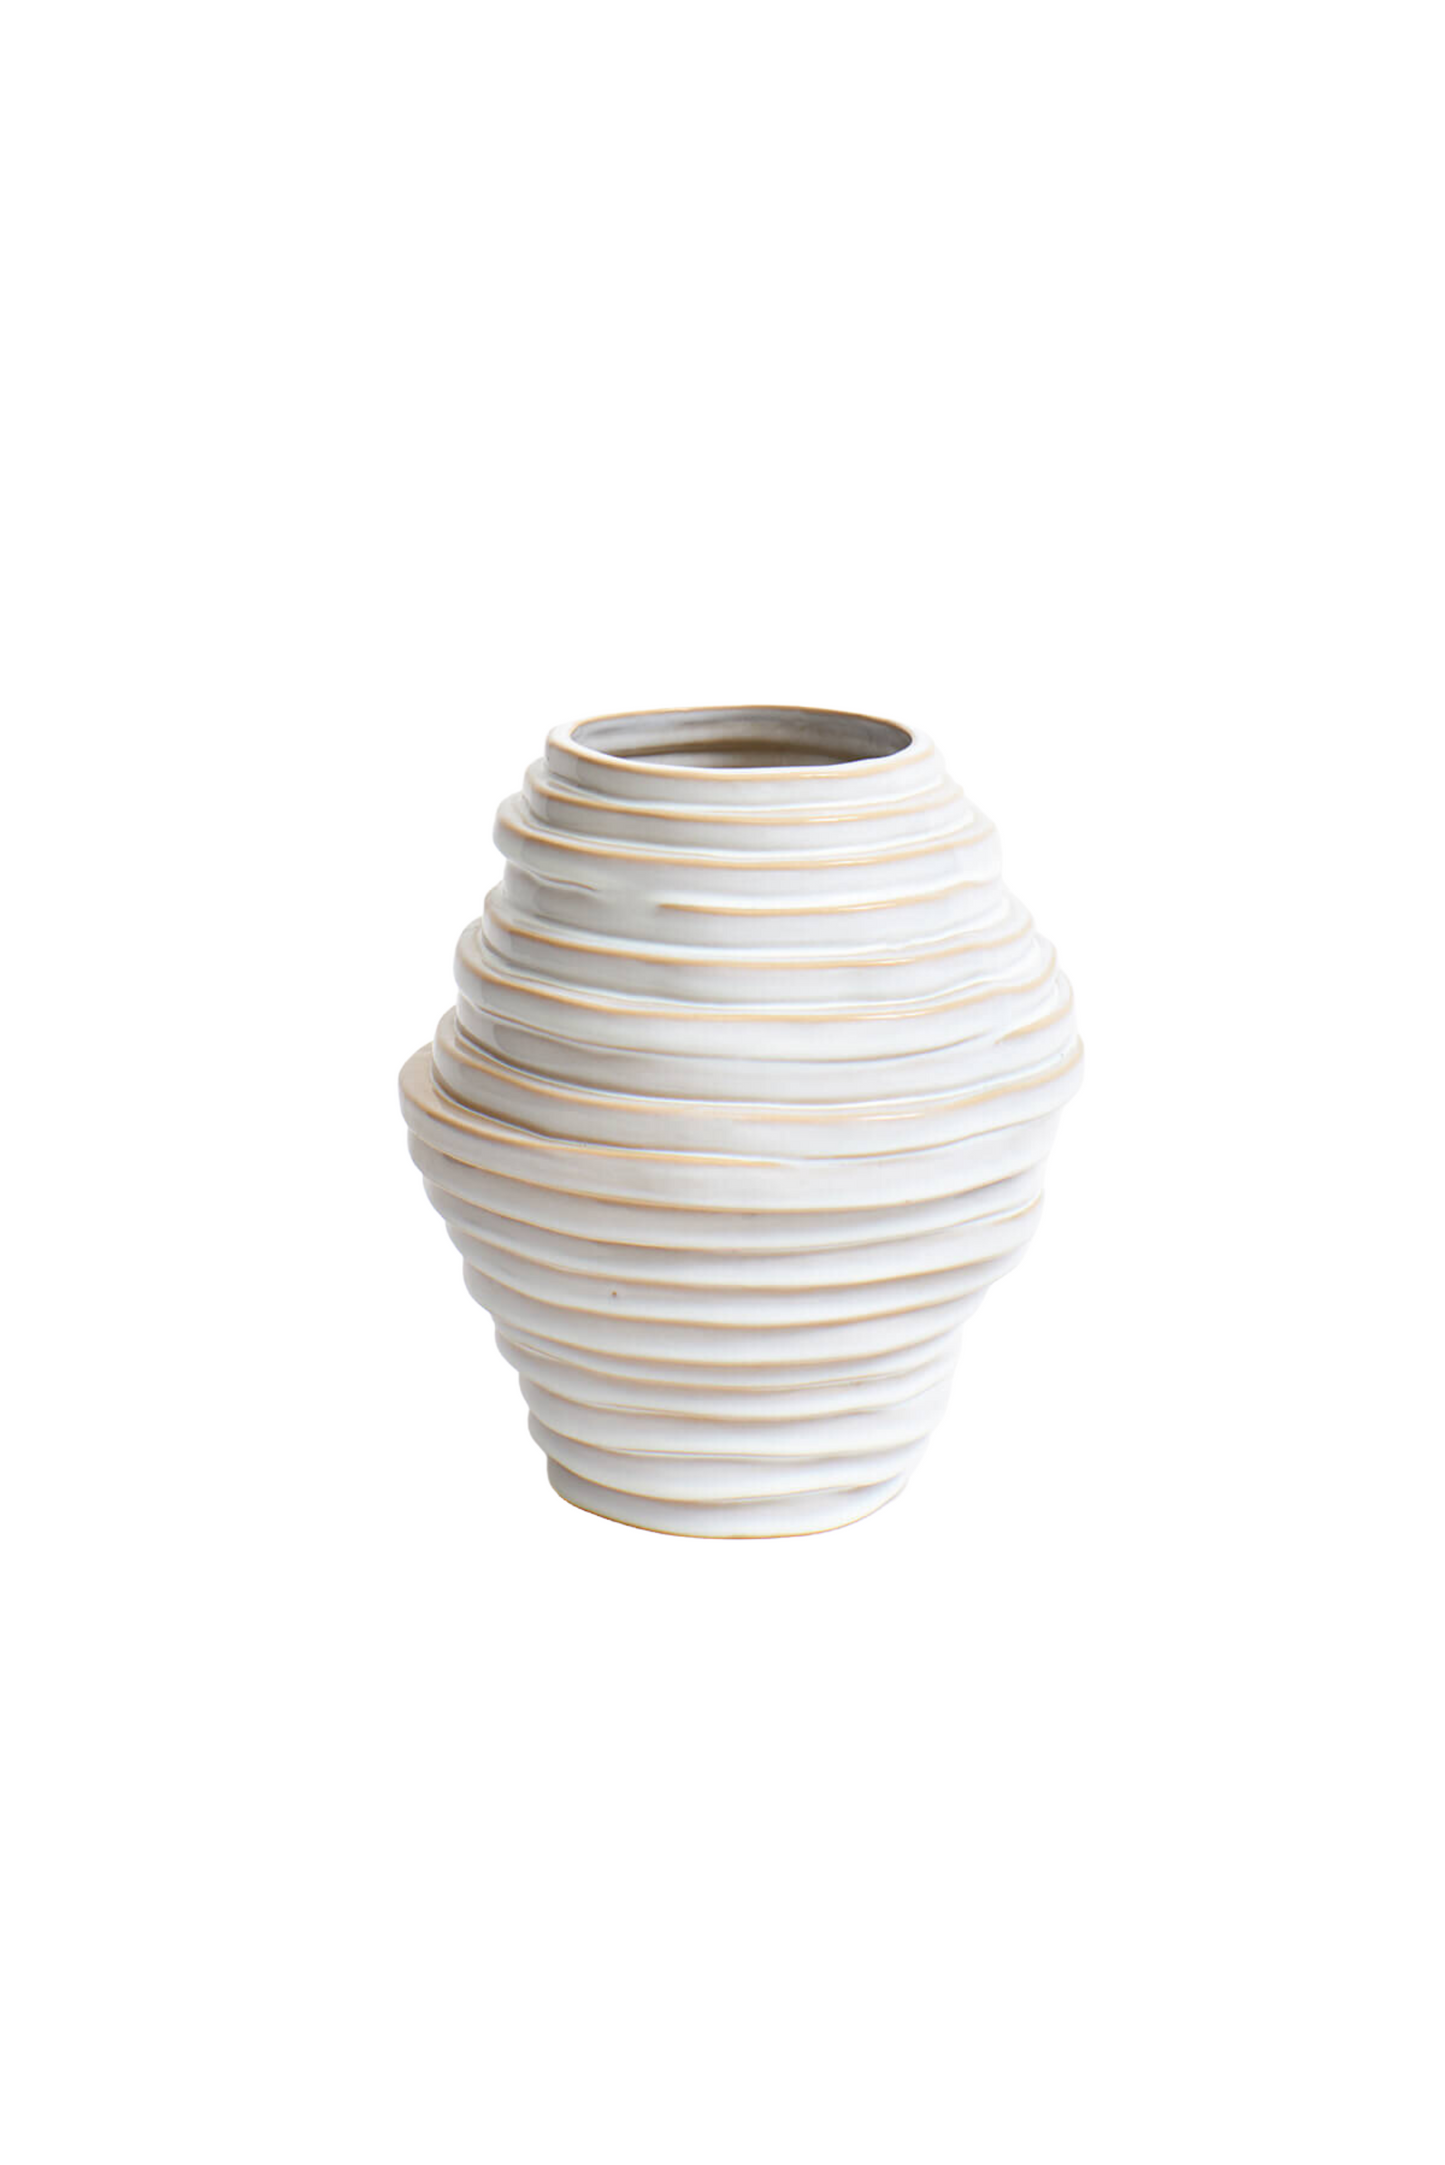 PROJECT 213A // ALFONSO VASE